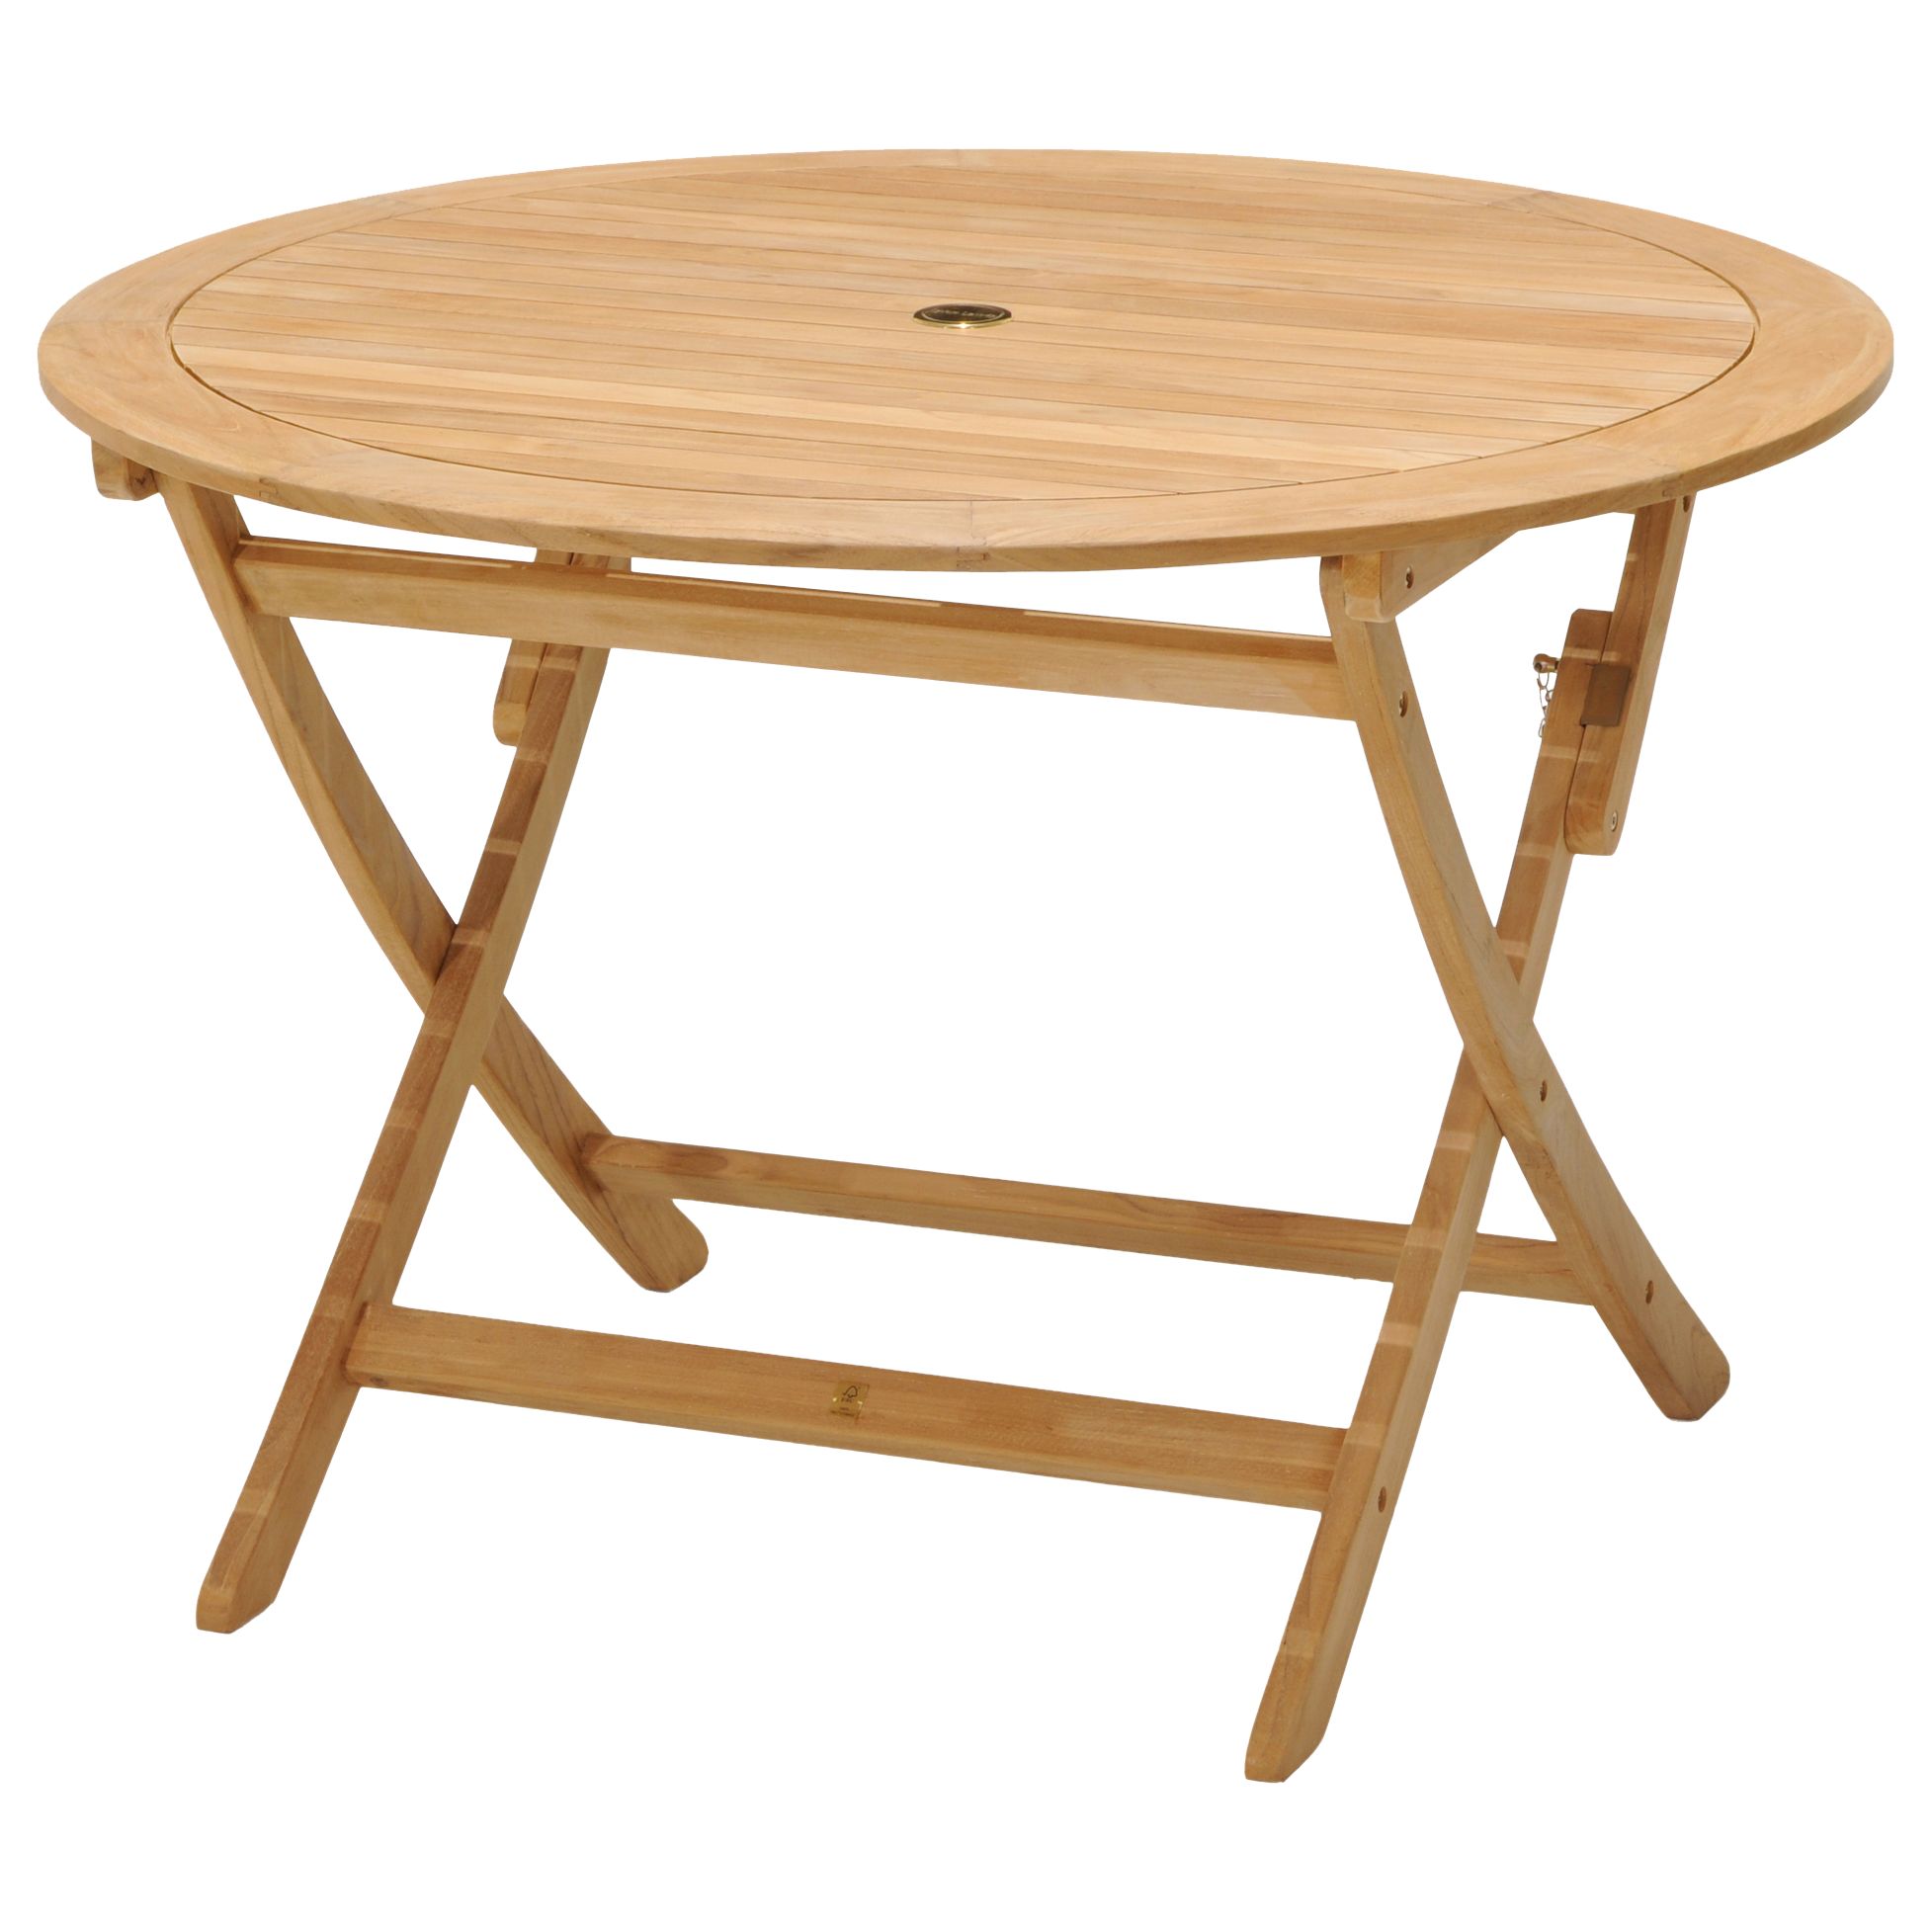 4 Seater Foldable Garden Table, Round Wooden Folding Garden Table And Chairs